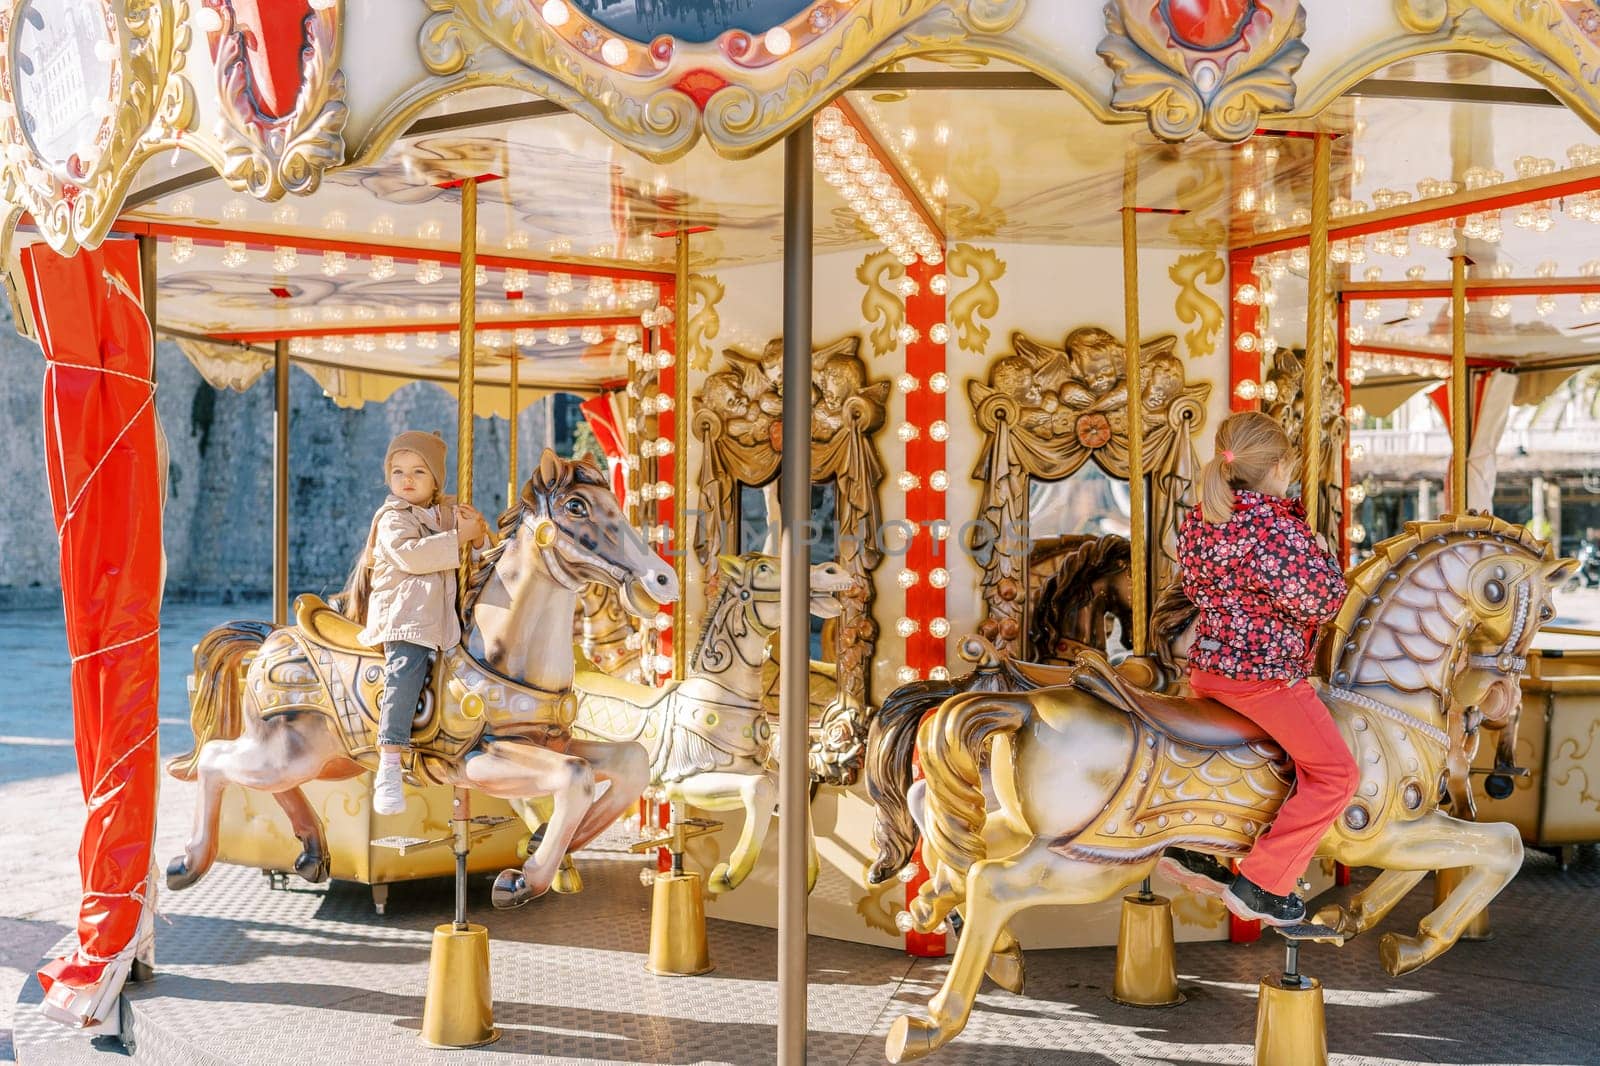 Little children ride colorful toy horses on a carousel while holding onto a pole. High quality photo